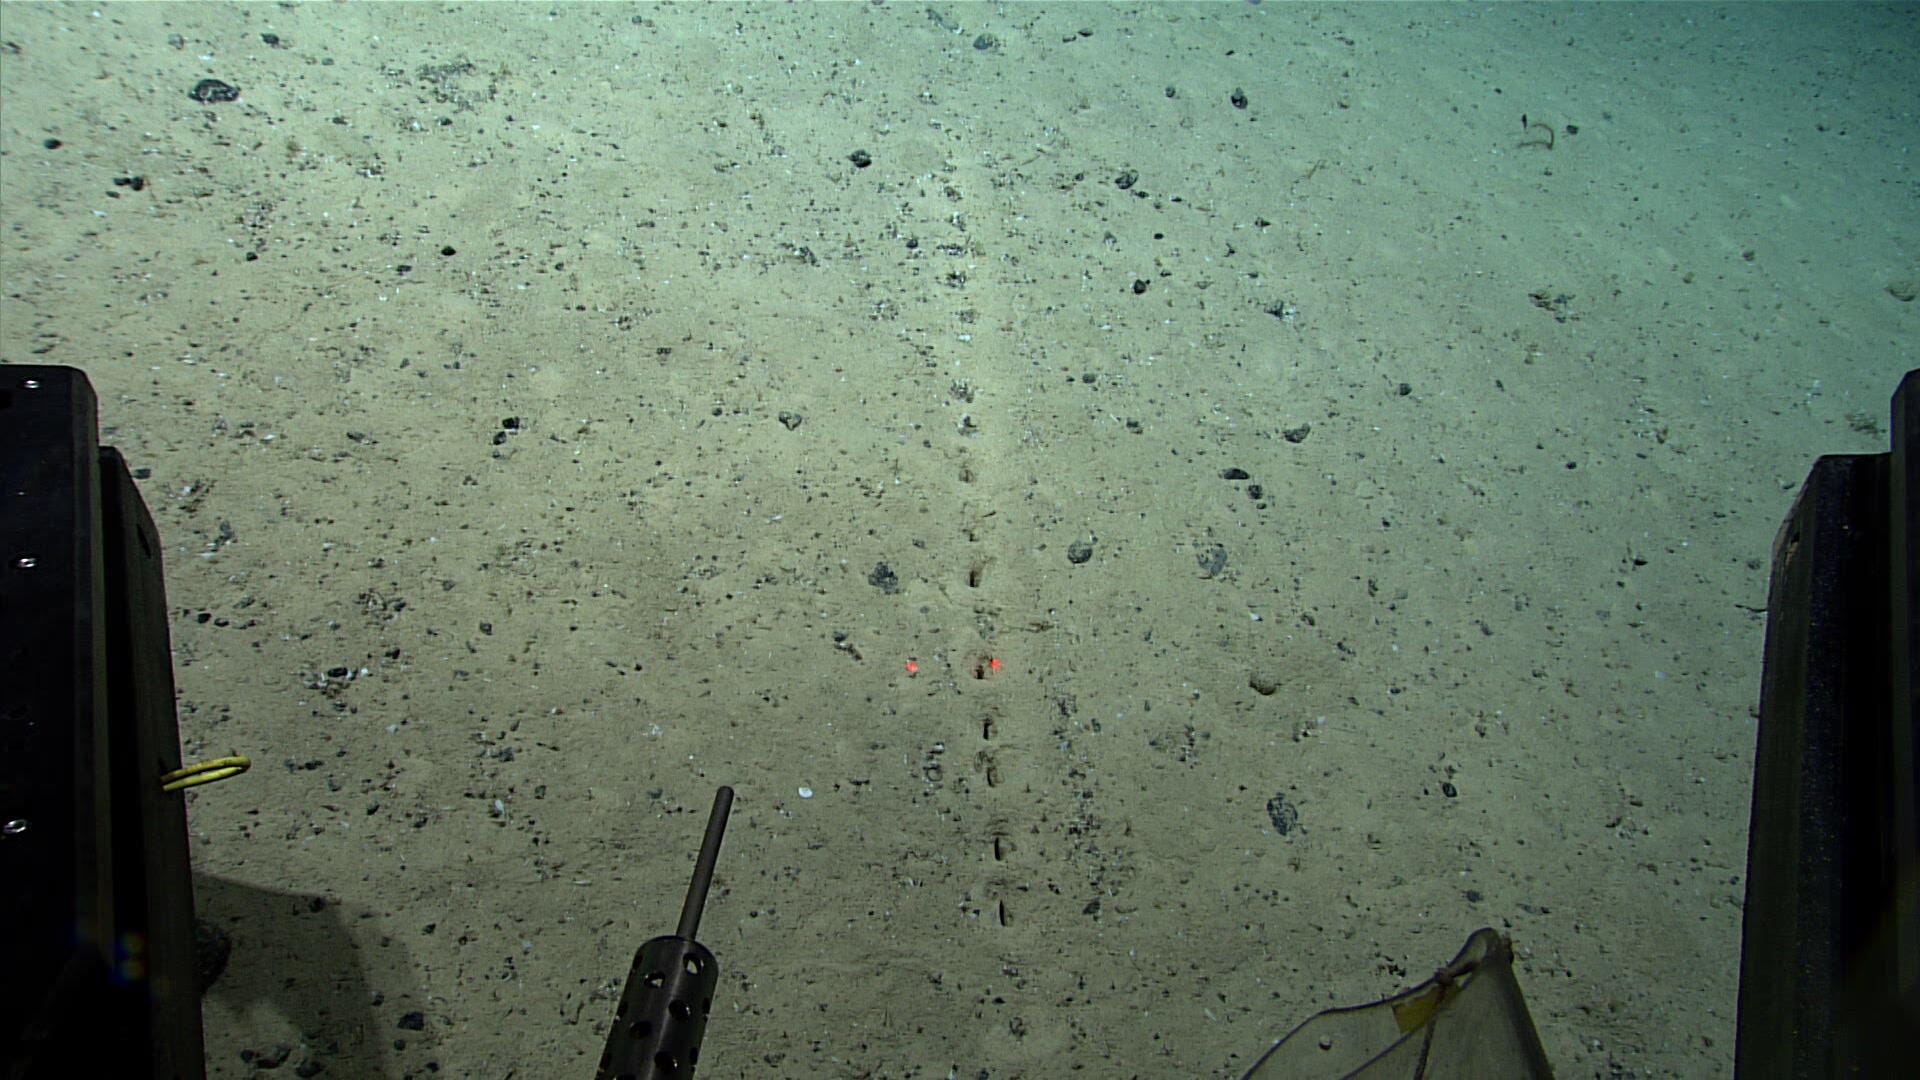 Sandy ocean bottom with regular perforation-like holes in a straight line.